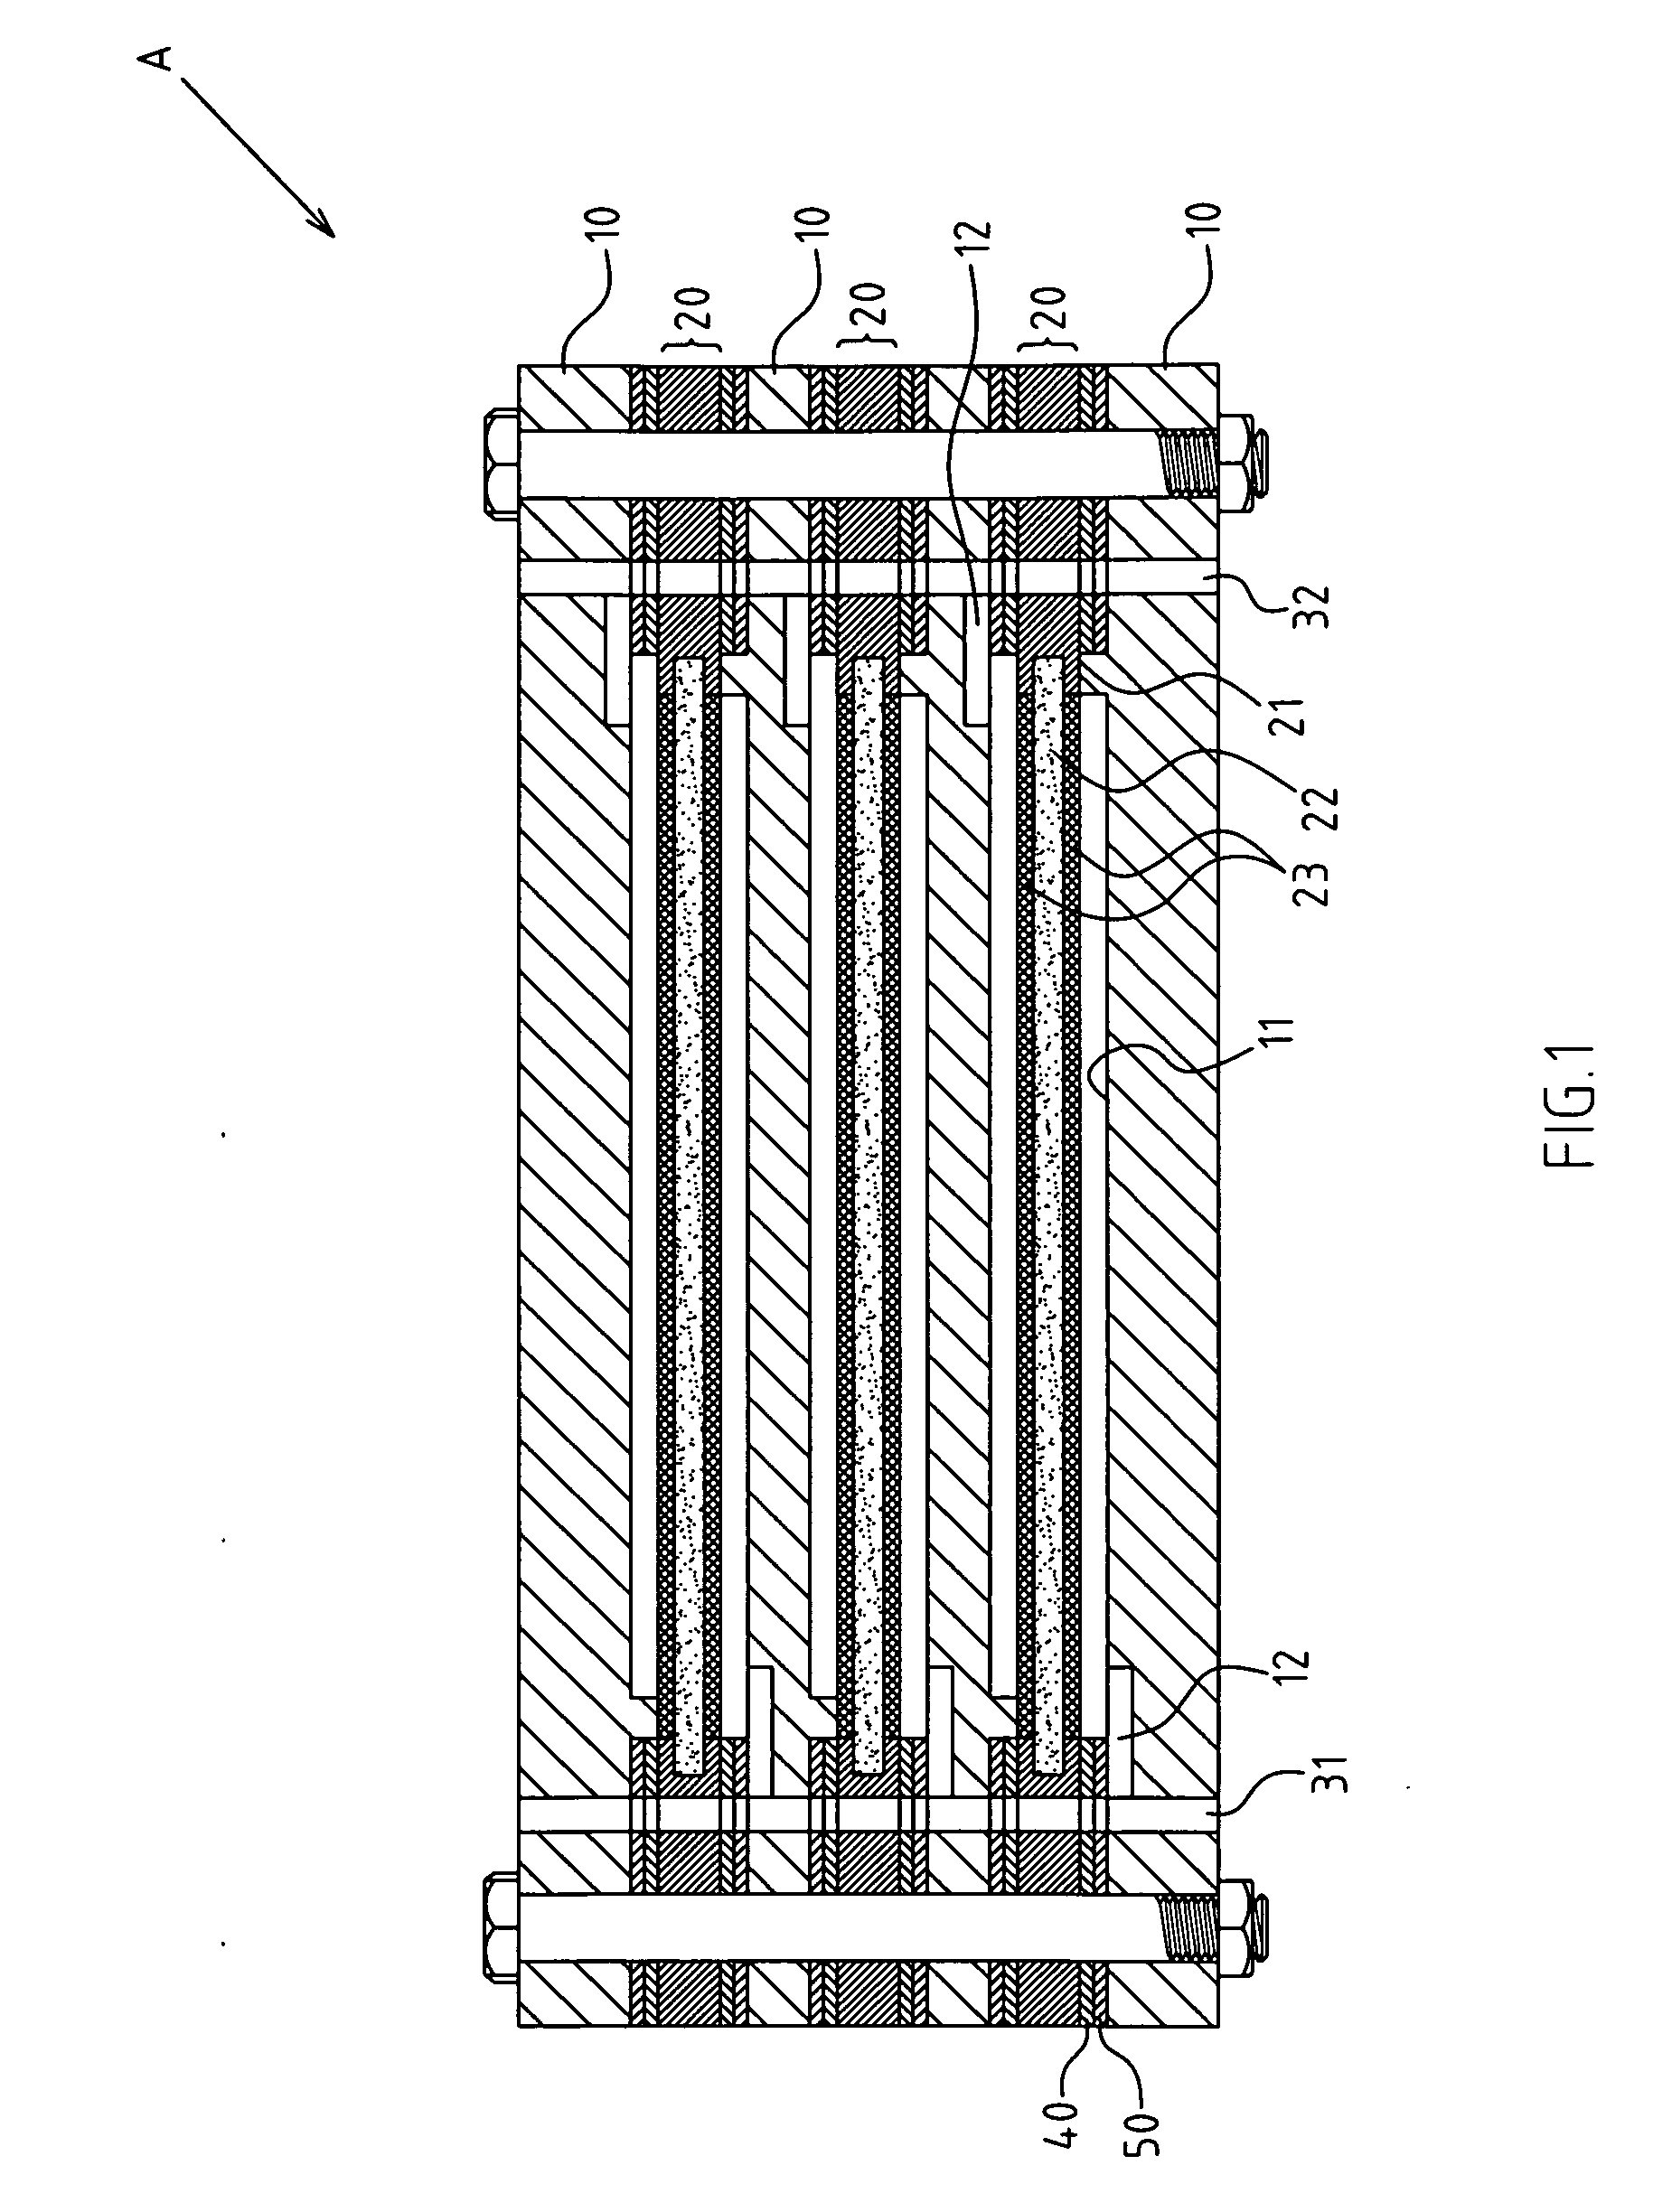 Fuel cell module